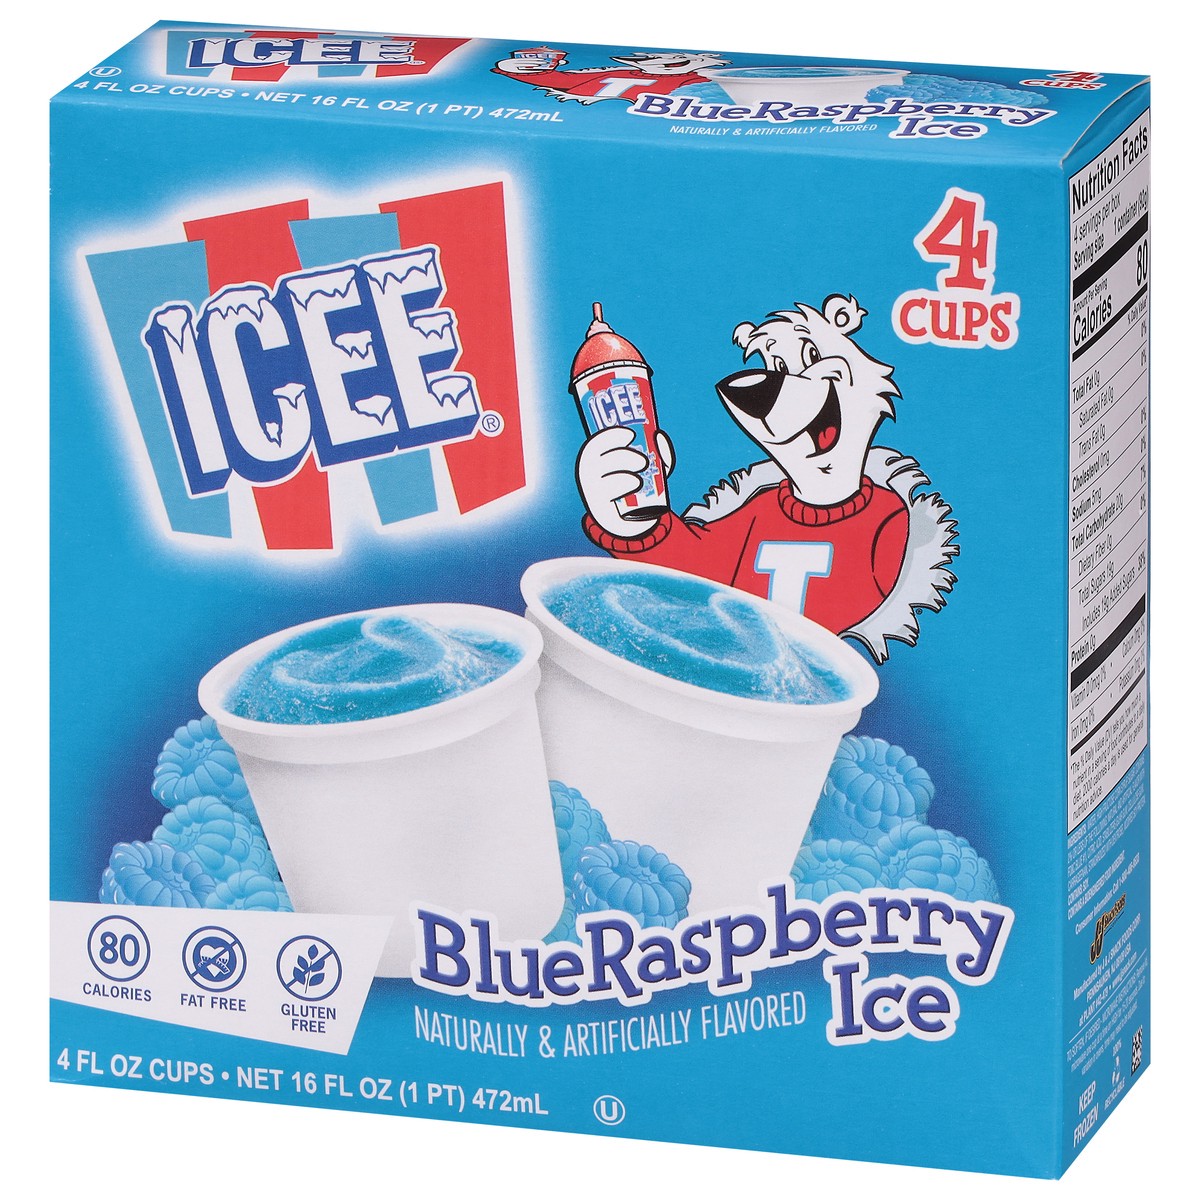 slide 3 of 11, ICEE BlueRaspberry Ice Cups 4 - 4 fl oz Cups, 4 ct